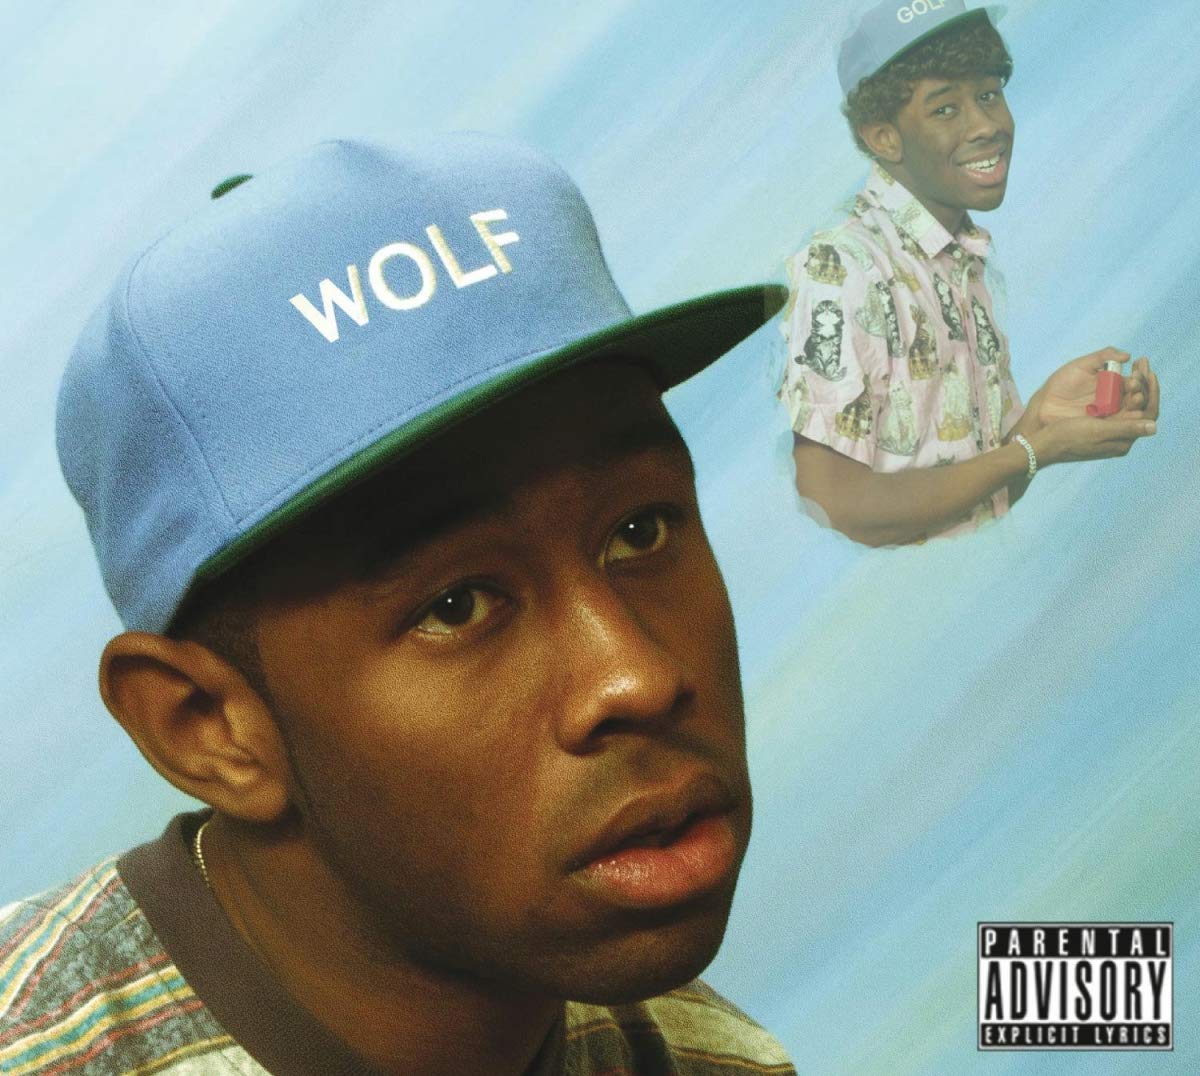 All 10 Tyler, the Creator Album and Mixtape Covers, Ranked